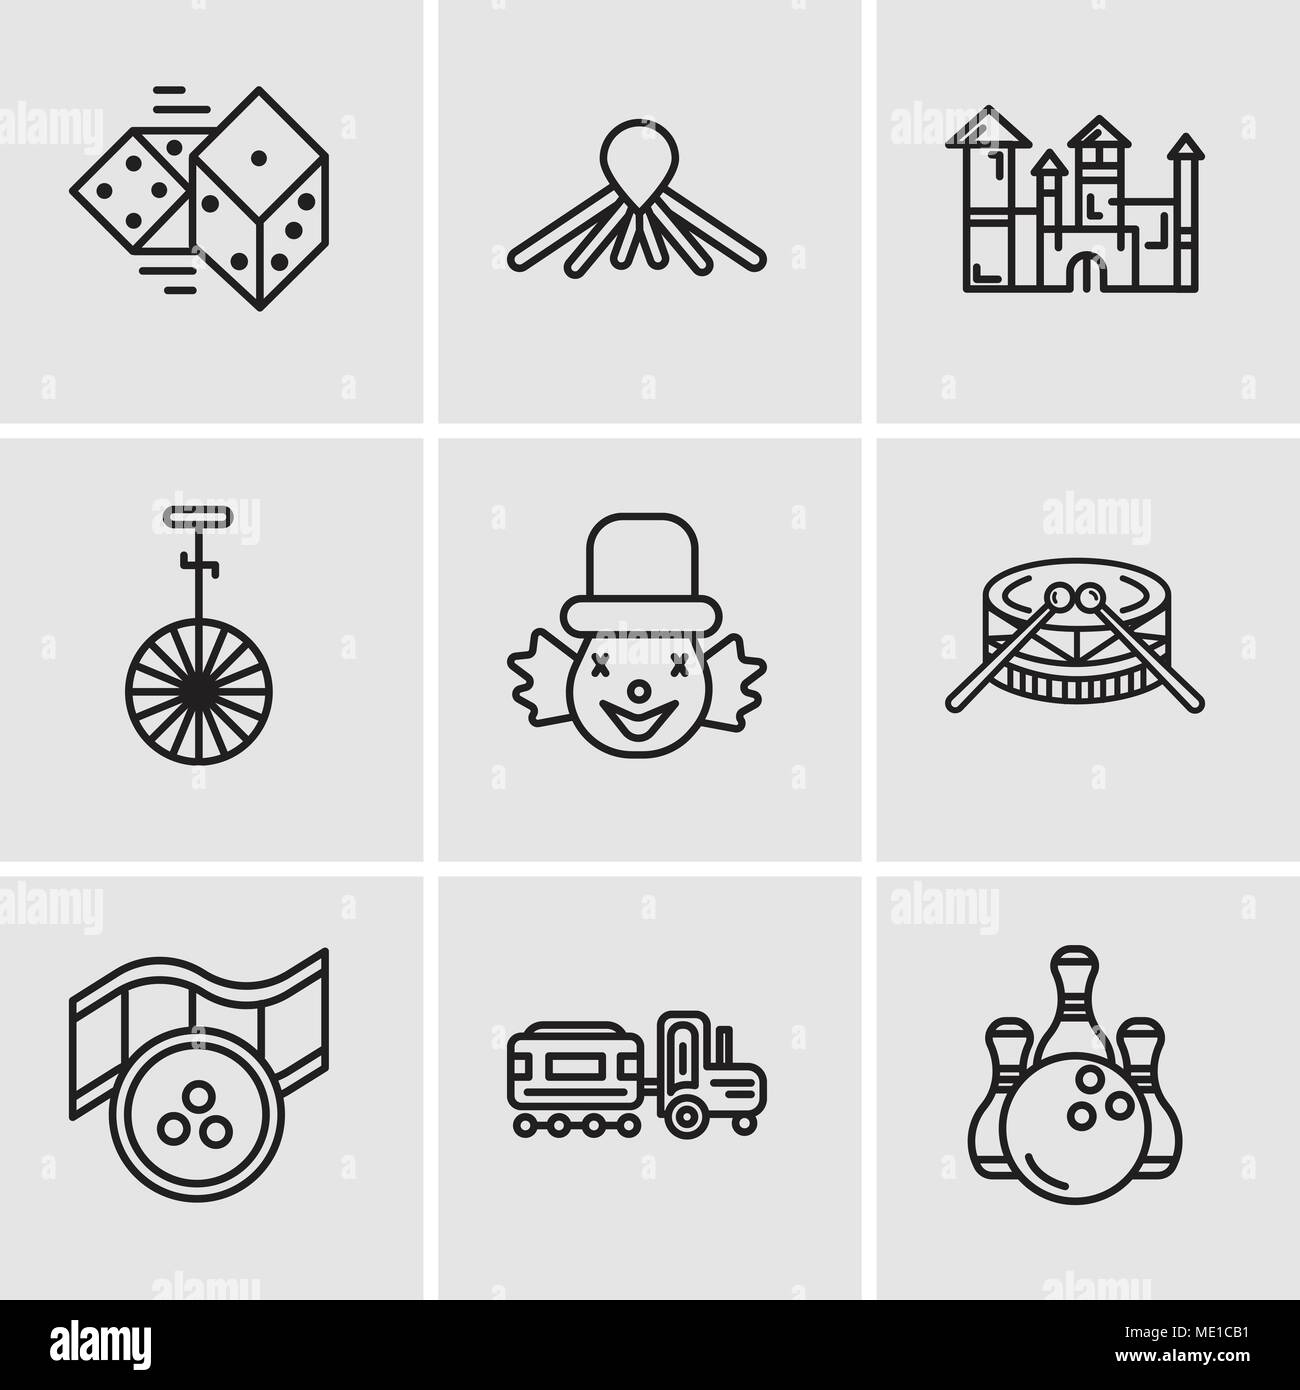 Set Of 9 simple editable icons such as Bowling, Kid, Movie, Drums, Clown, Circus, Disneyland, Balloon dog, Dices, can be used for mobile, web UI Stock Vector